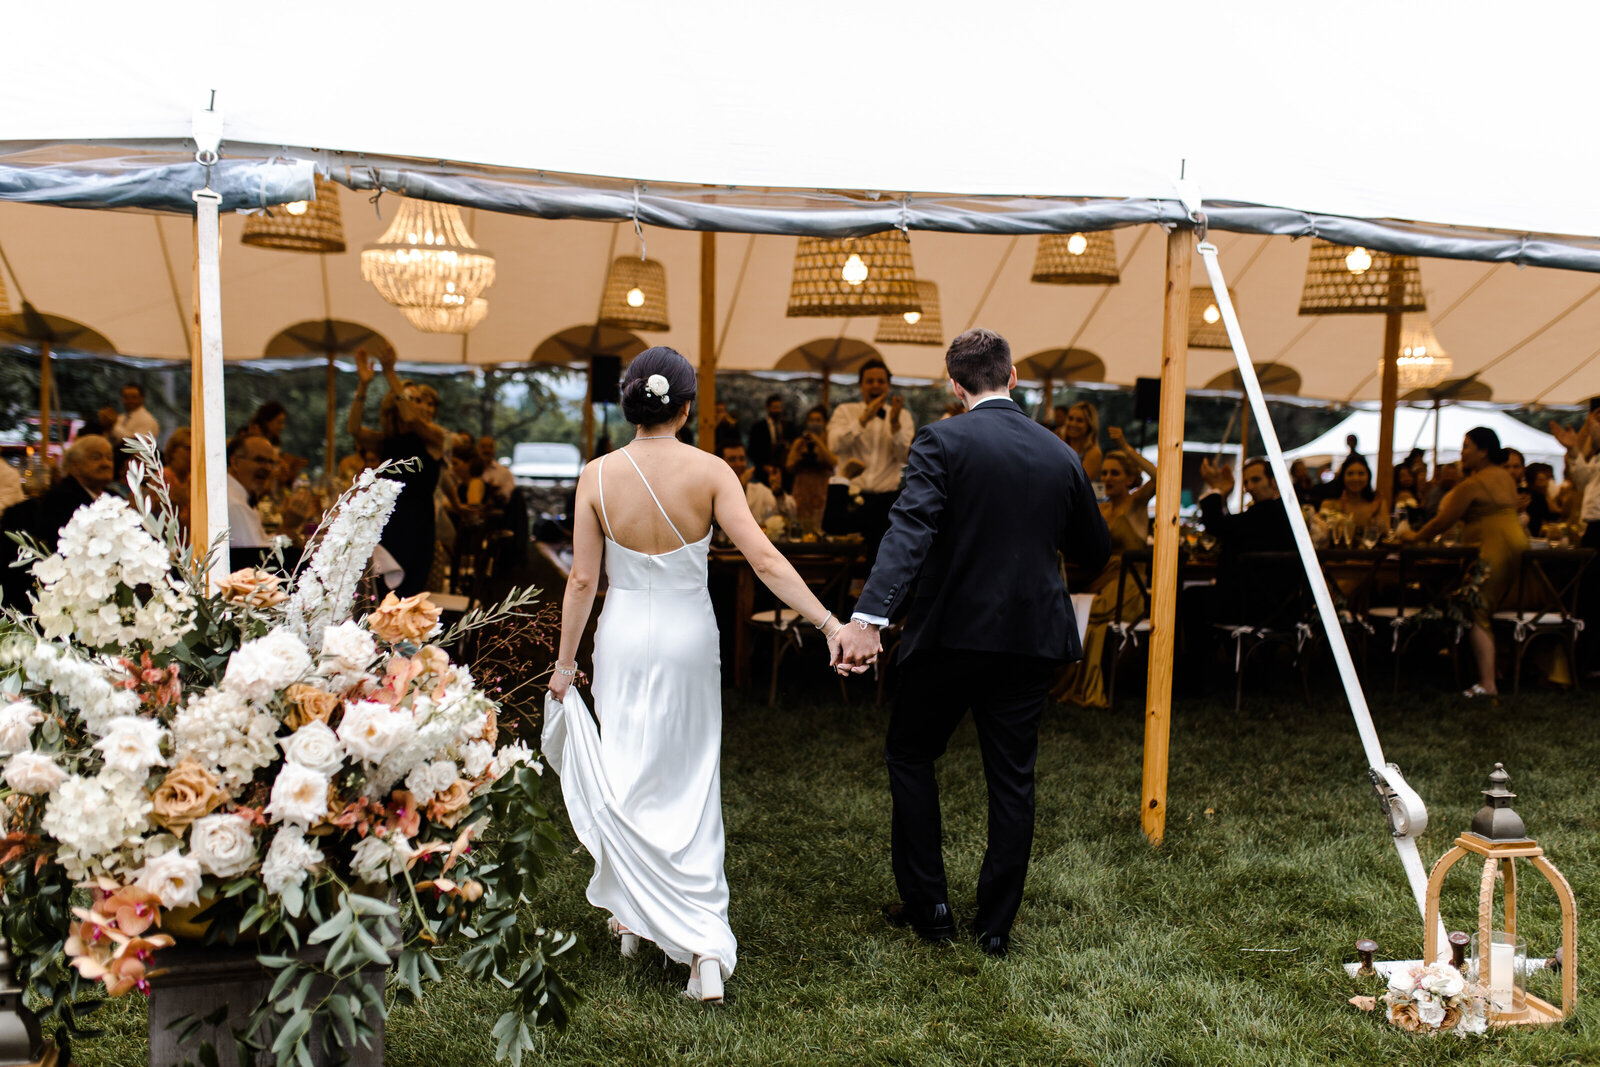 jubilee_events_connecticut_summer_tented_wedding_130